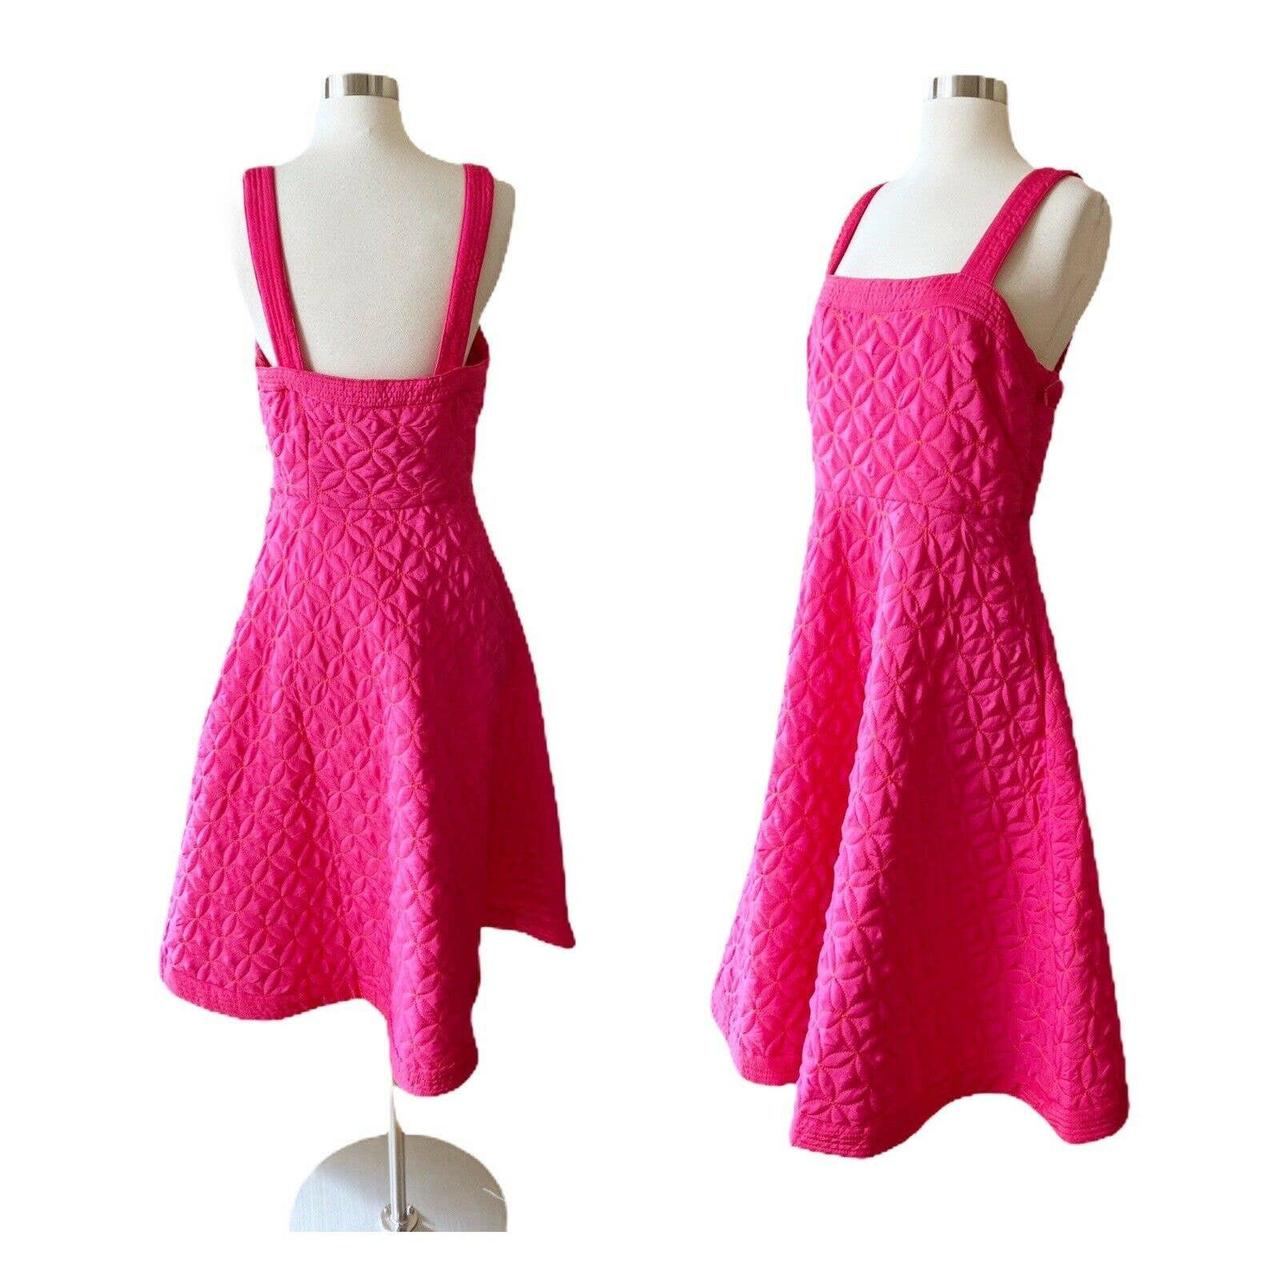 Product Image 2 - ANTHROPOLOGIE Tomasa Quilted Dress Hot